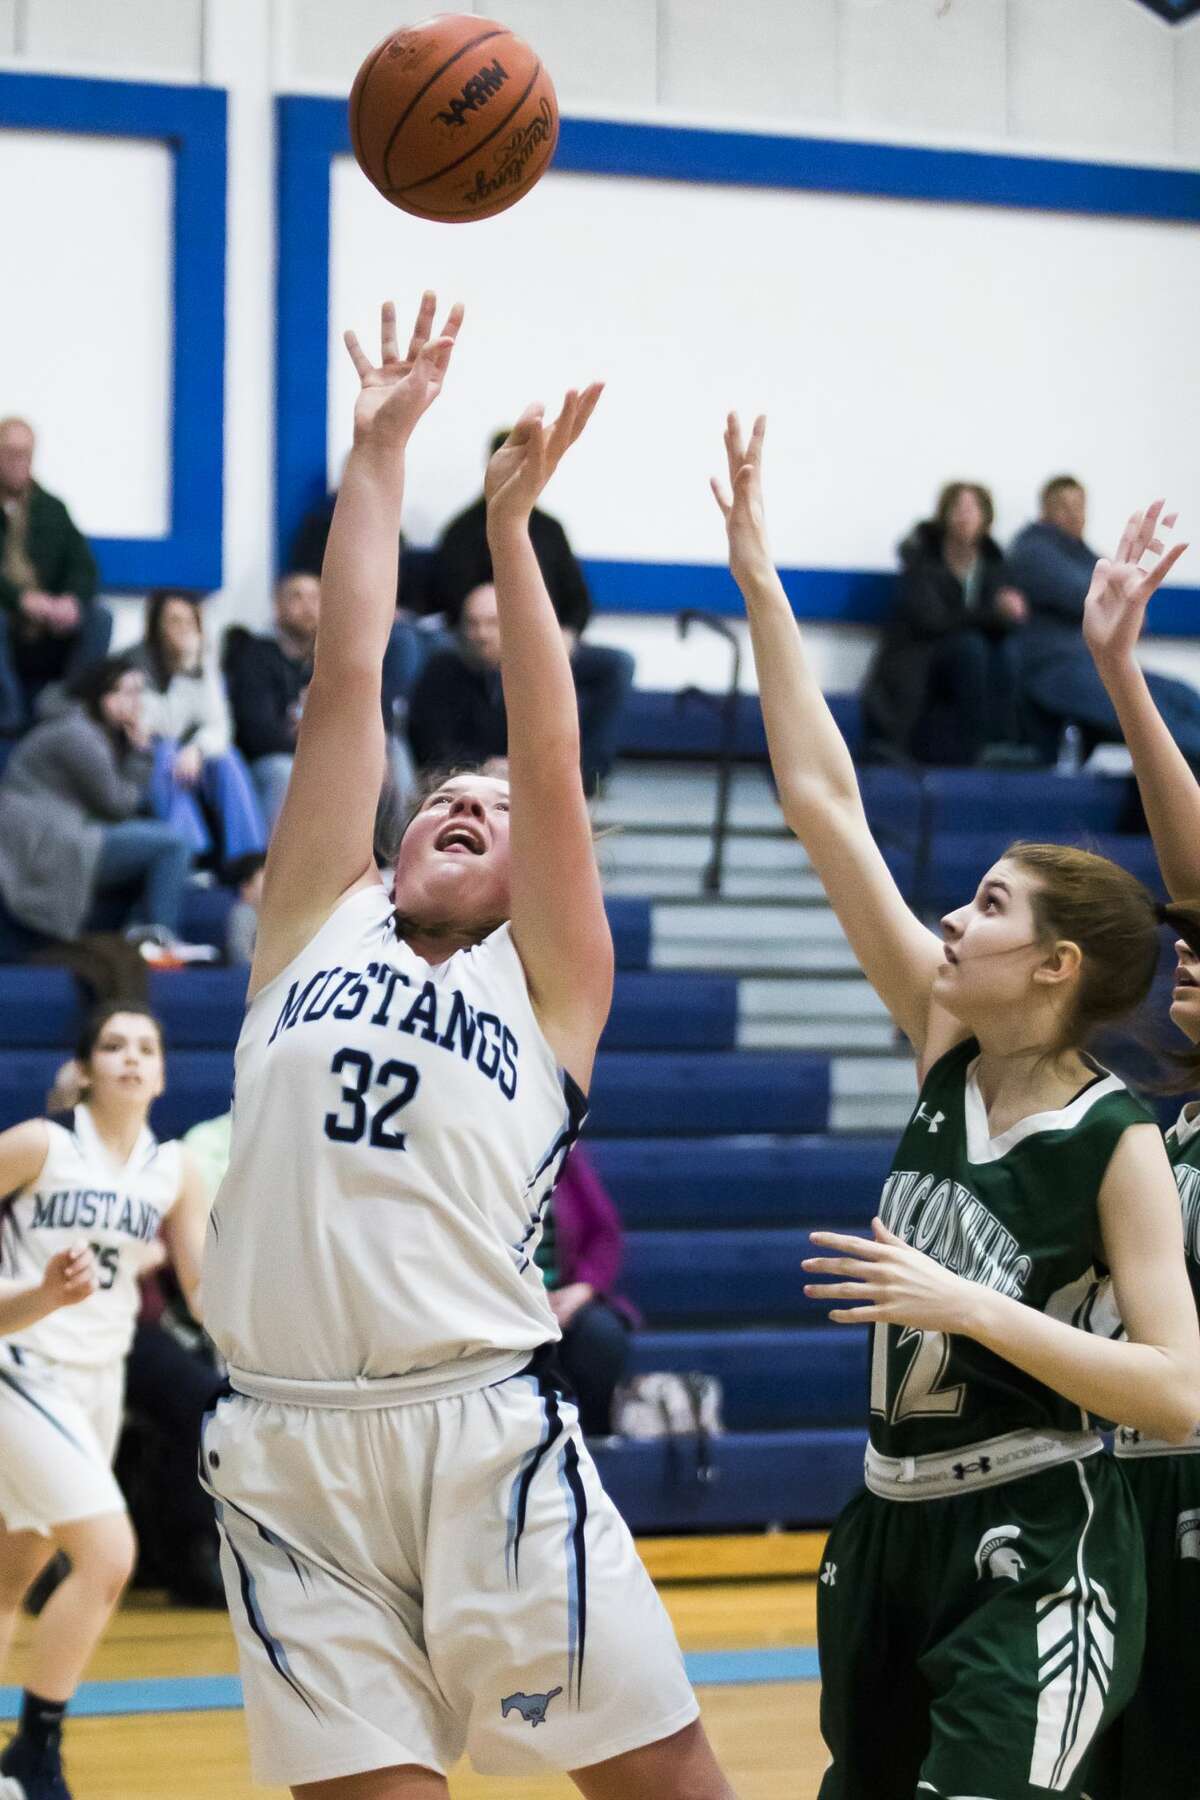 Meridian's Audrey Kielpinski takes a shot during the Mustangs' Division 3 district semifinal against Pinconning on Wednesday, March 6, 2019 at Meridian Early College High School. (Katy Kildee/kkildee@mdn.net)